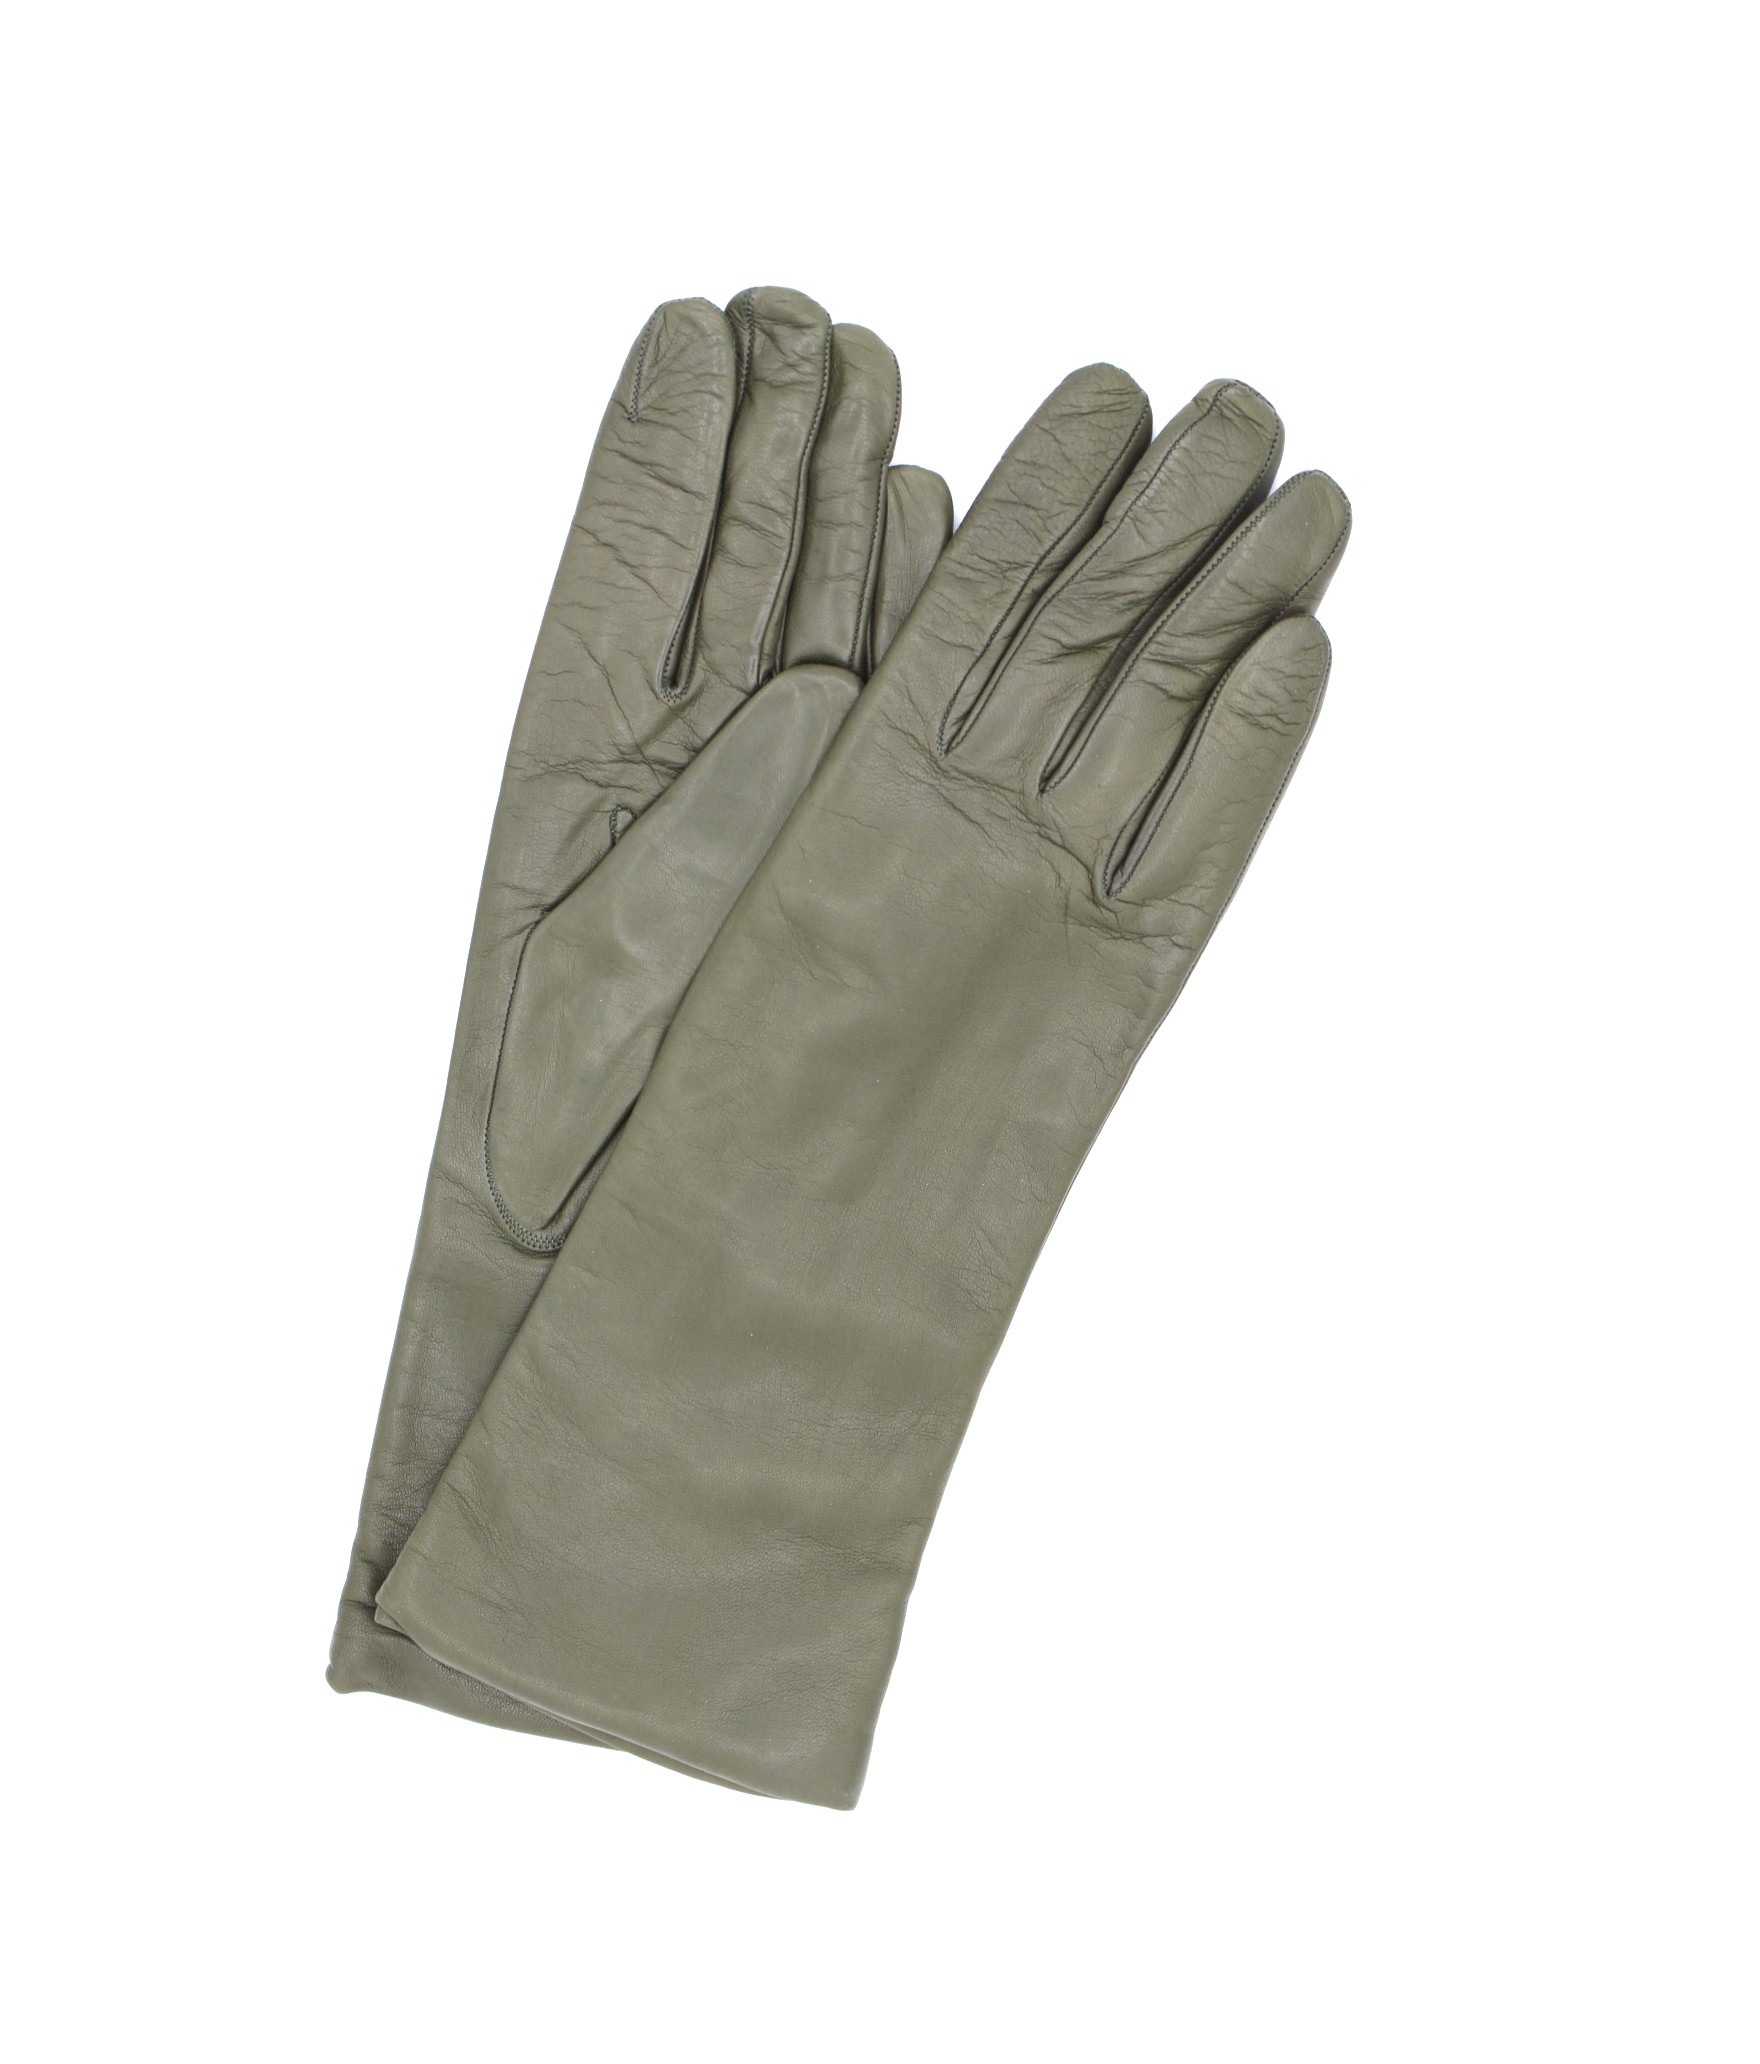 Woman Classic Nappa leather gloves 4bt cashmere lined Military